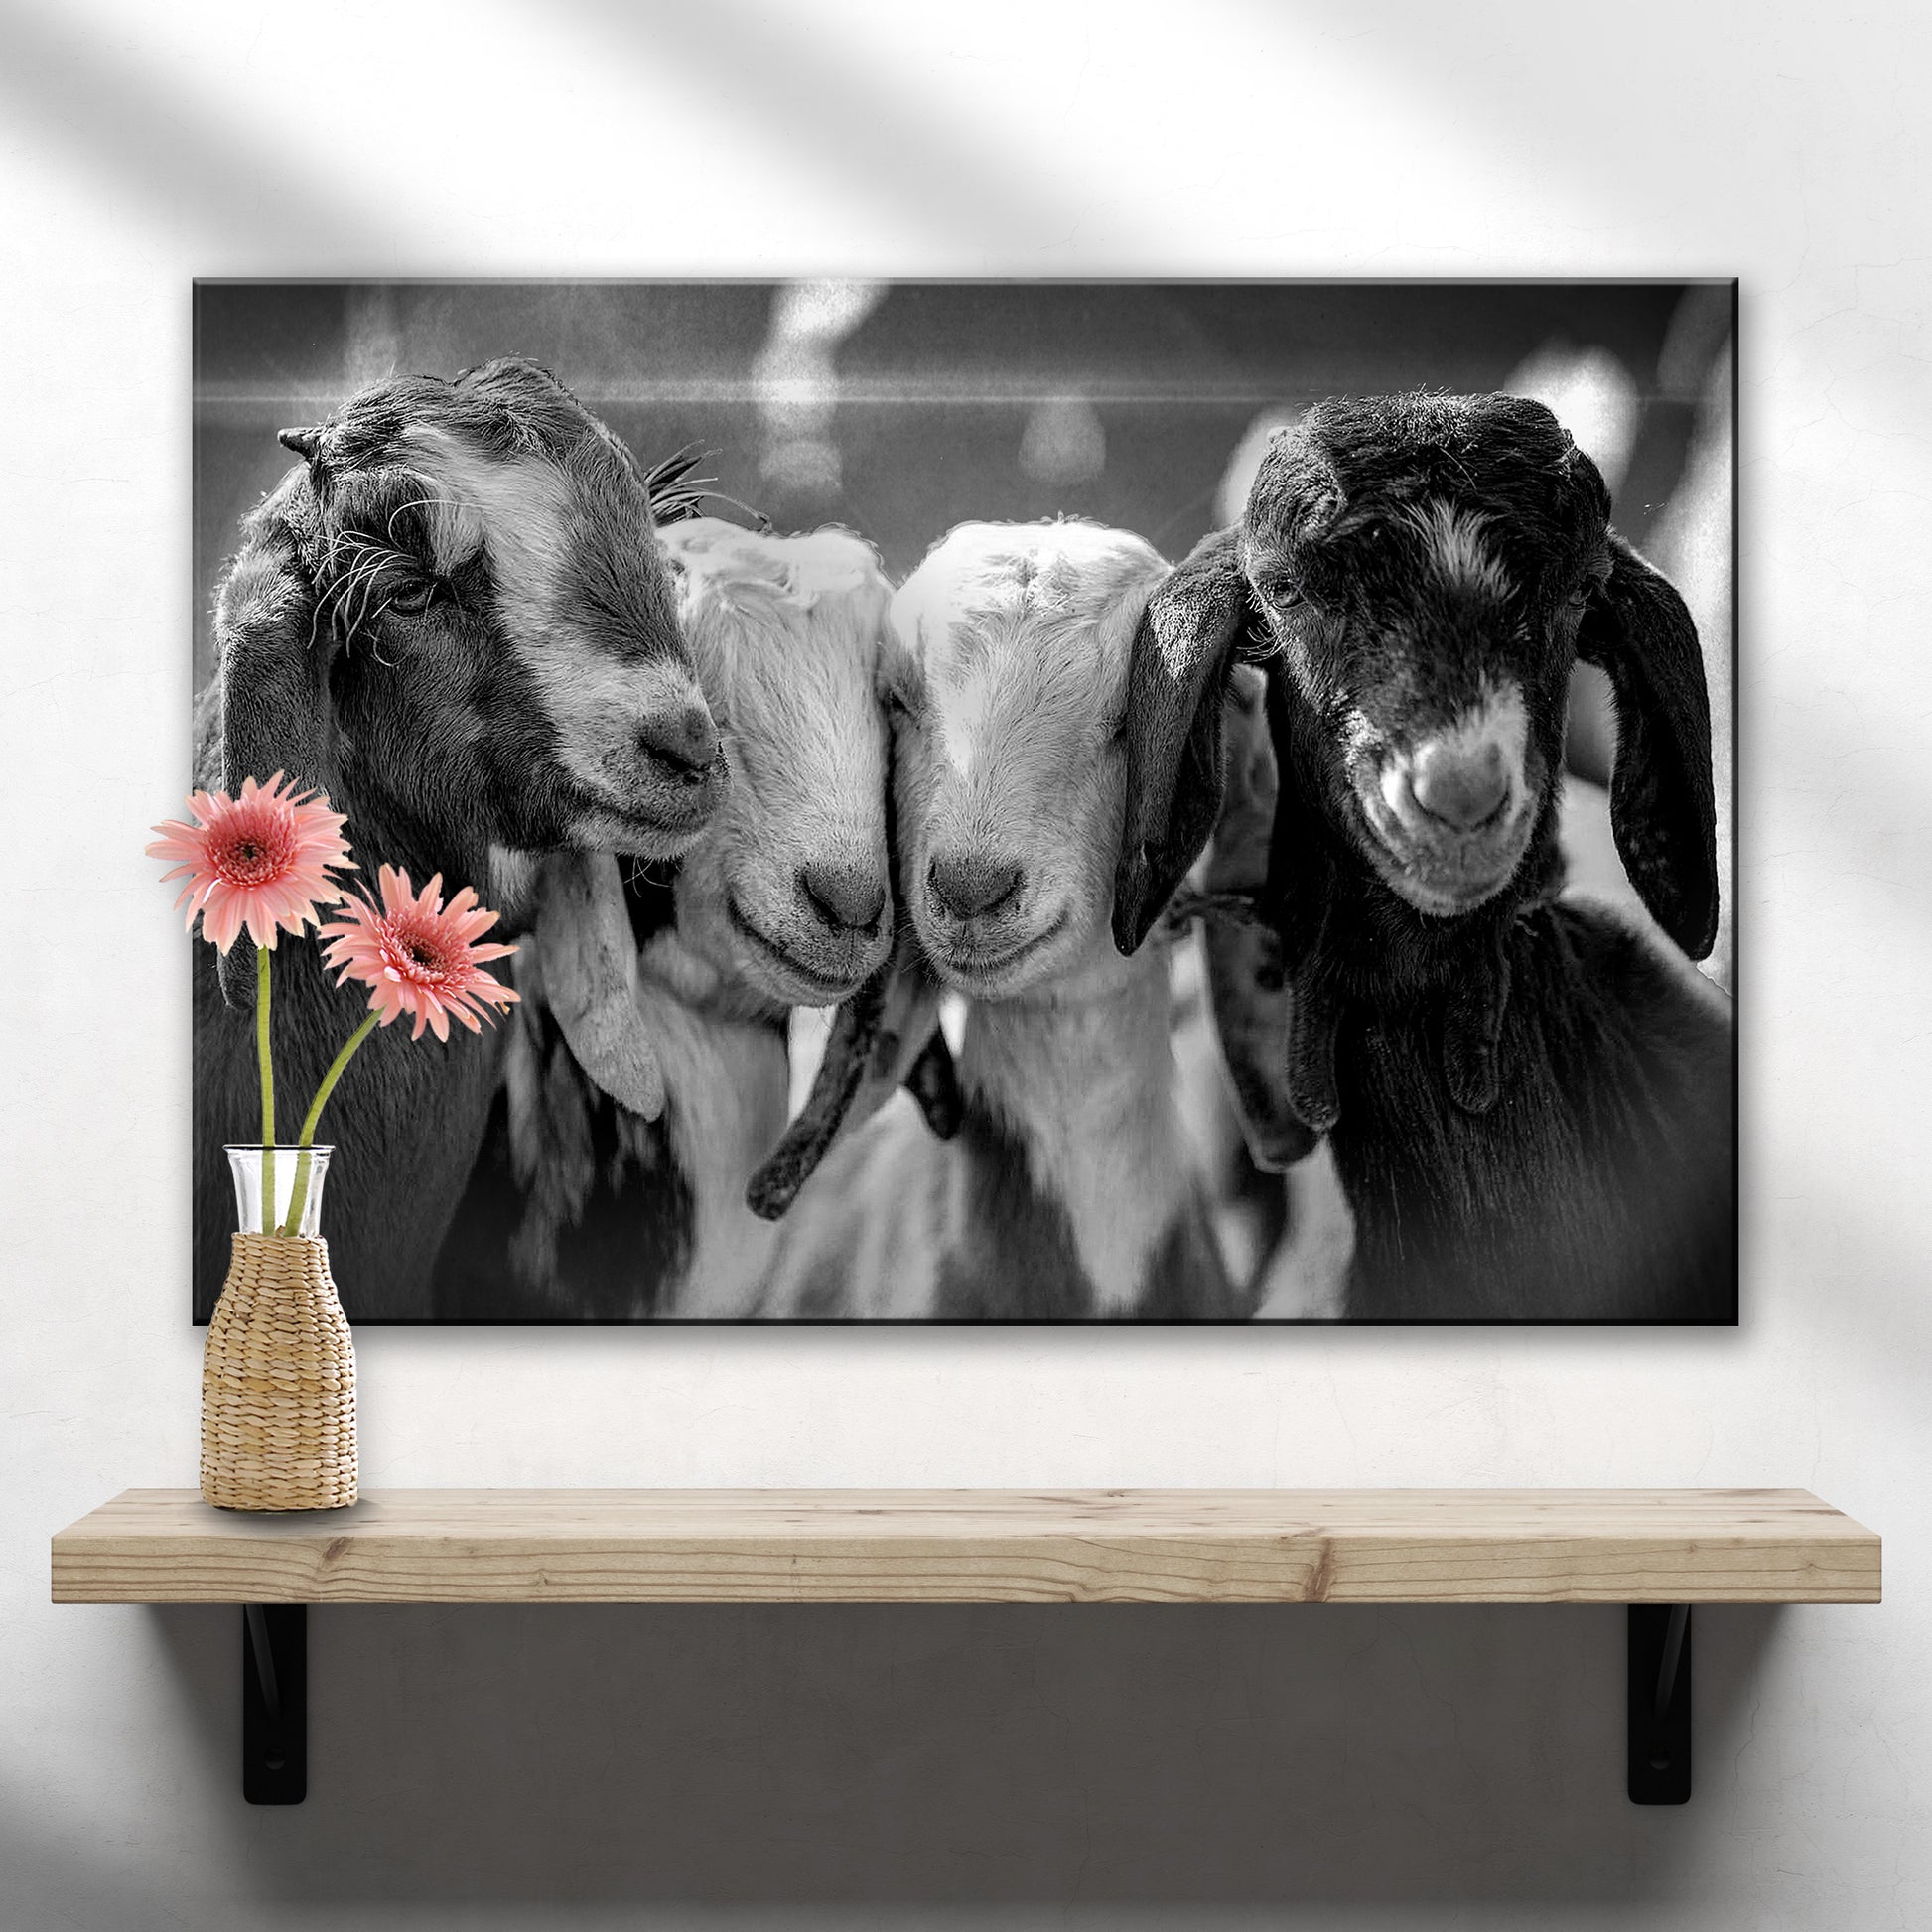 Black And White Baby Goats Canvas Wall Art - Image by Tailored Canvases